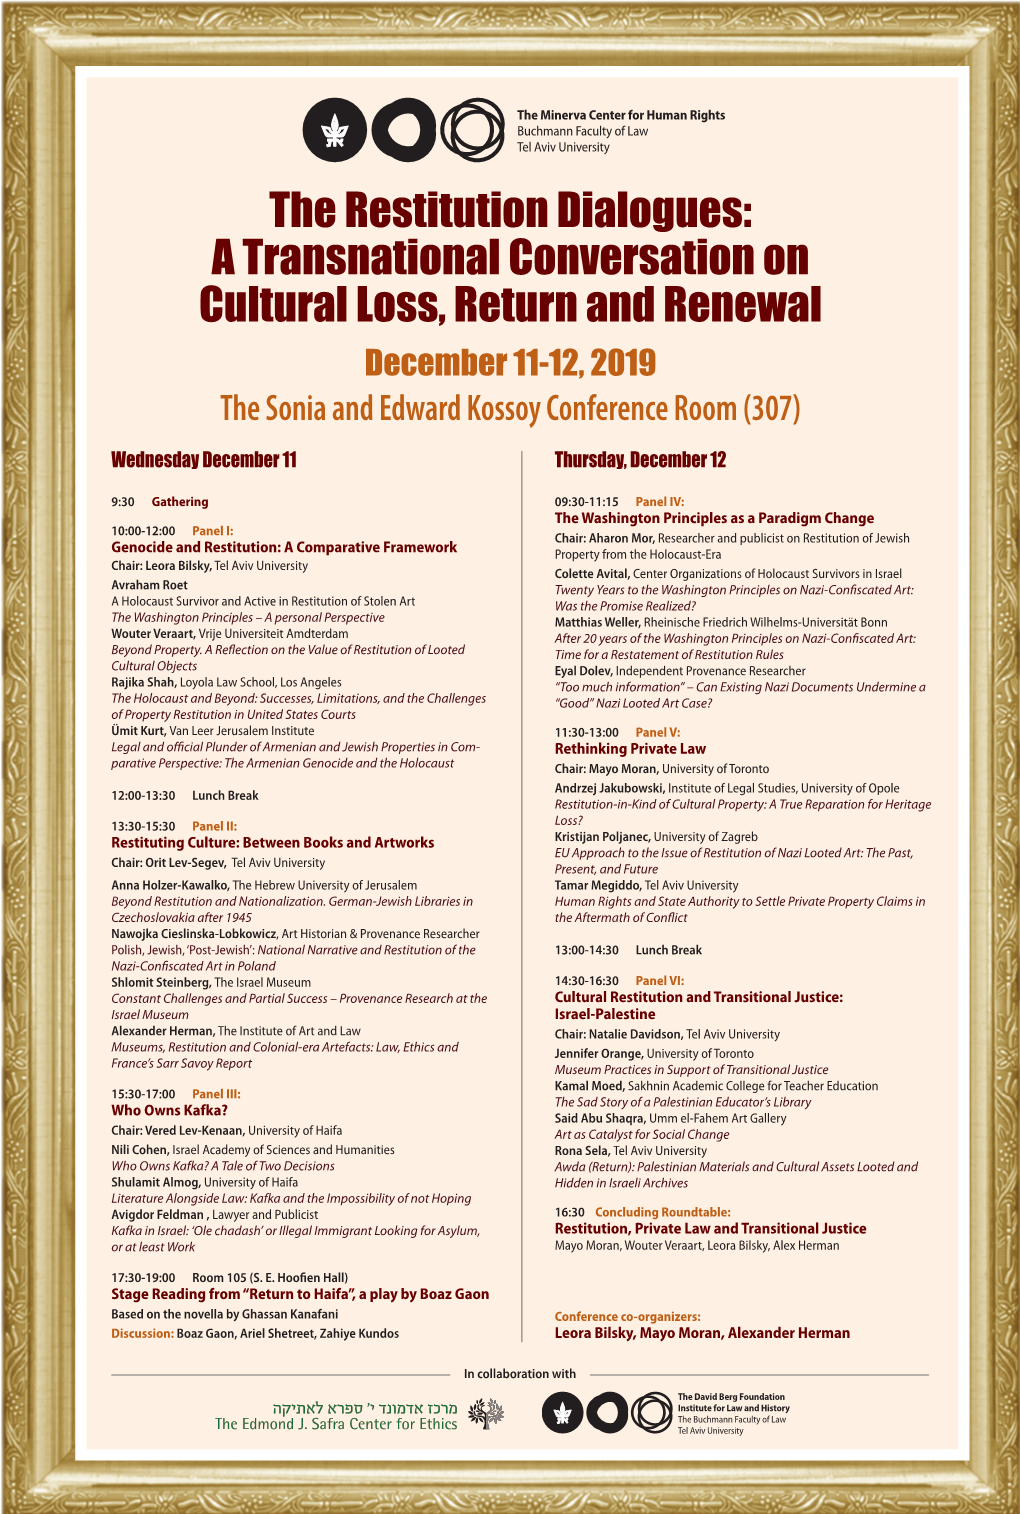 The Restitution Dialogues: a Transnational Conversation on Cultural Loss, Return and Renewal December 11-12, 2019 the Sonia and Edward Kossoy Conference Room (307)